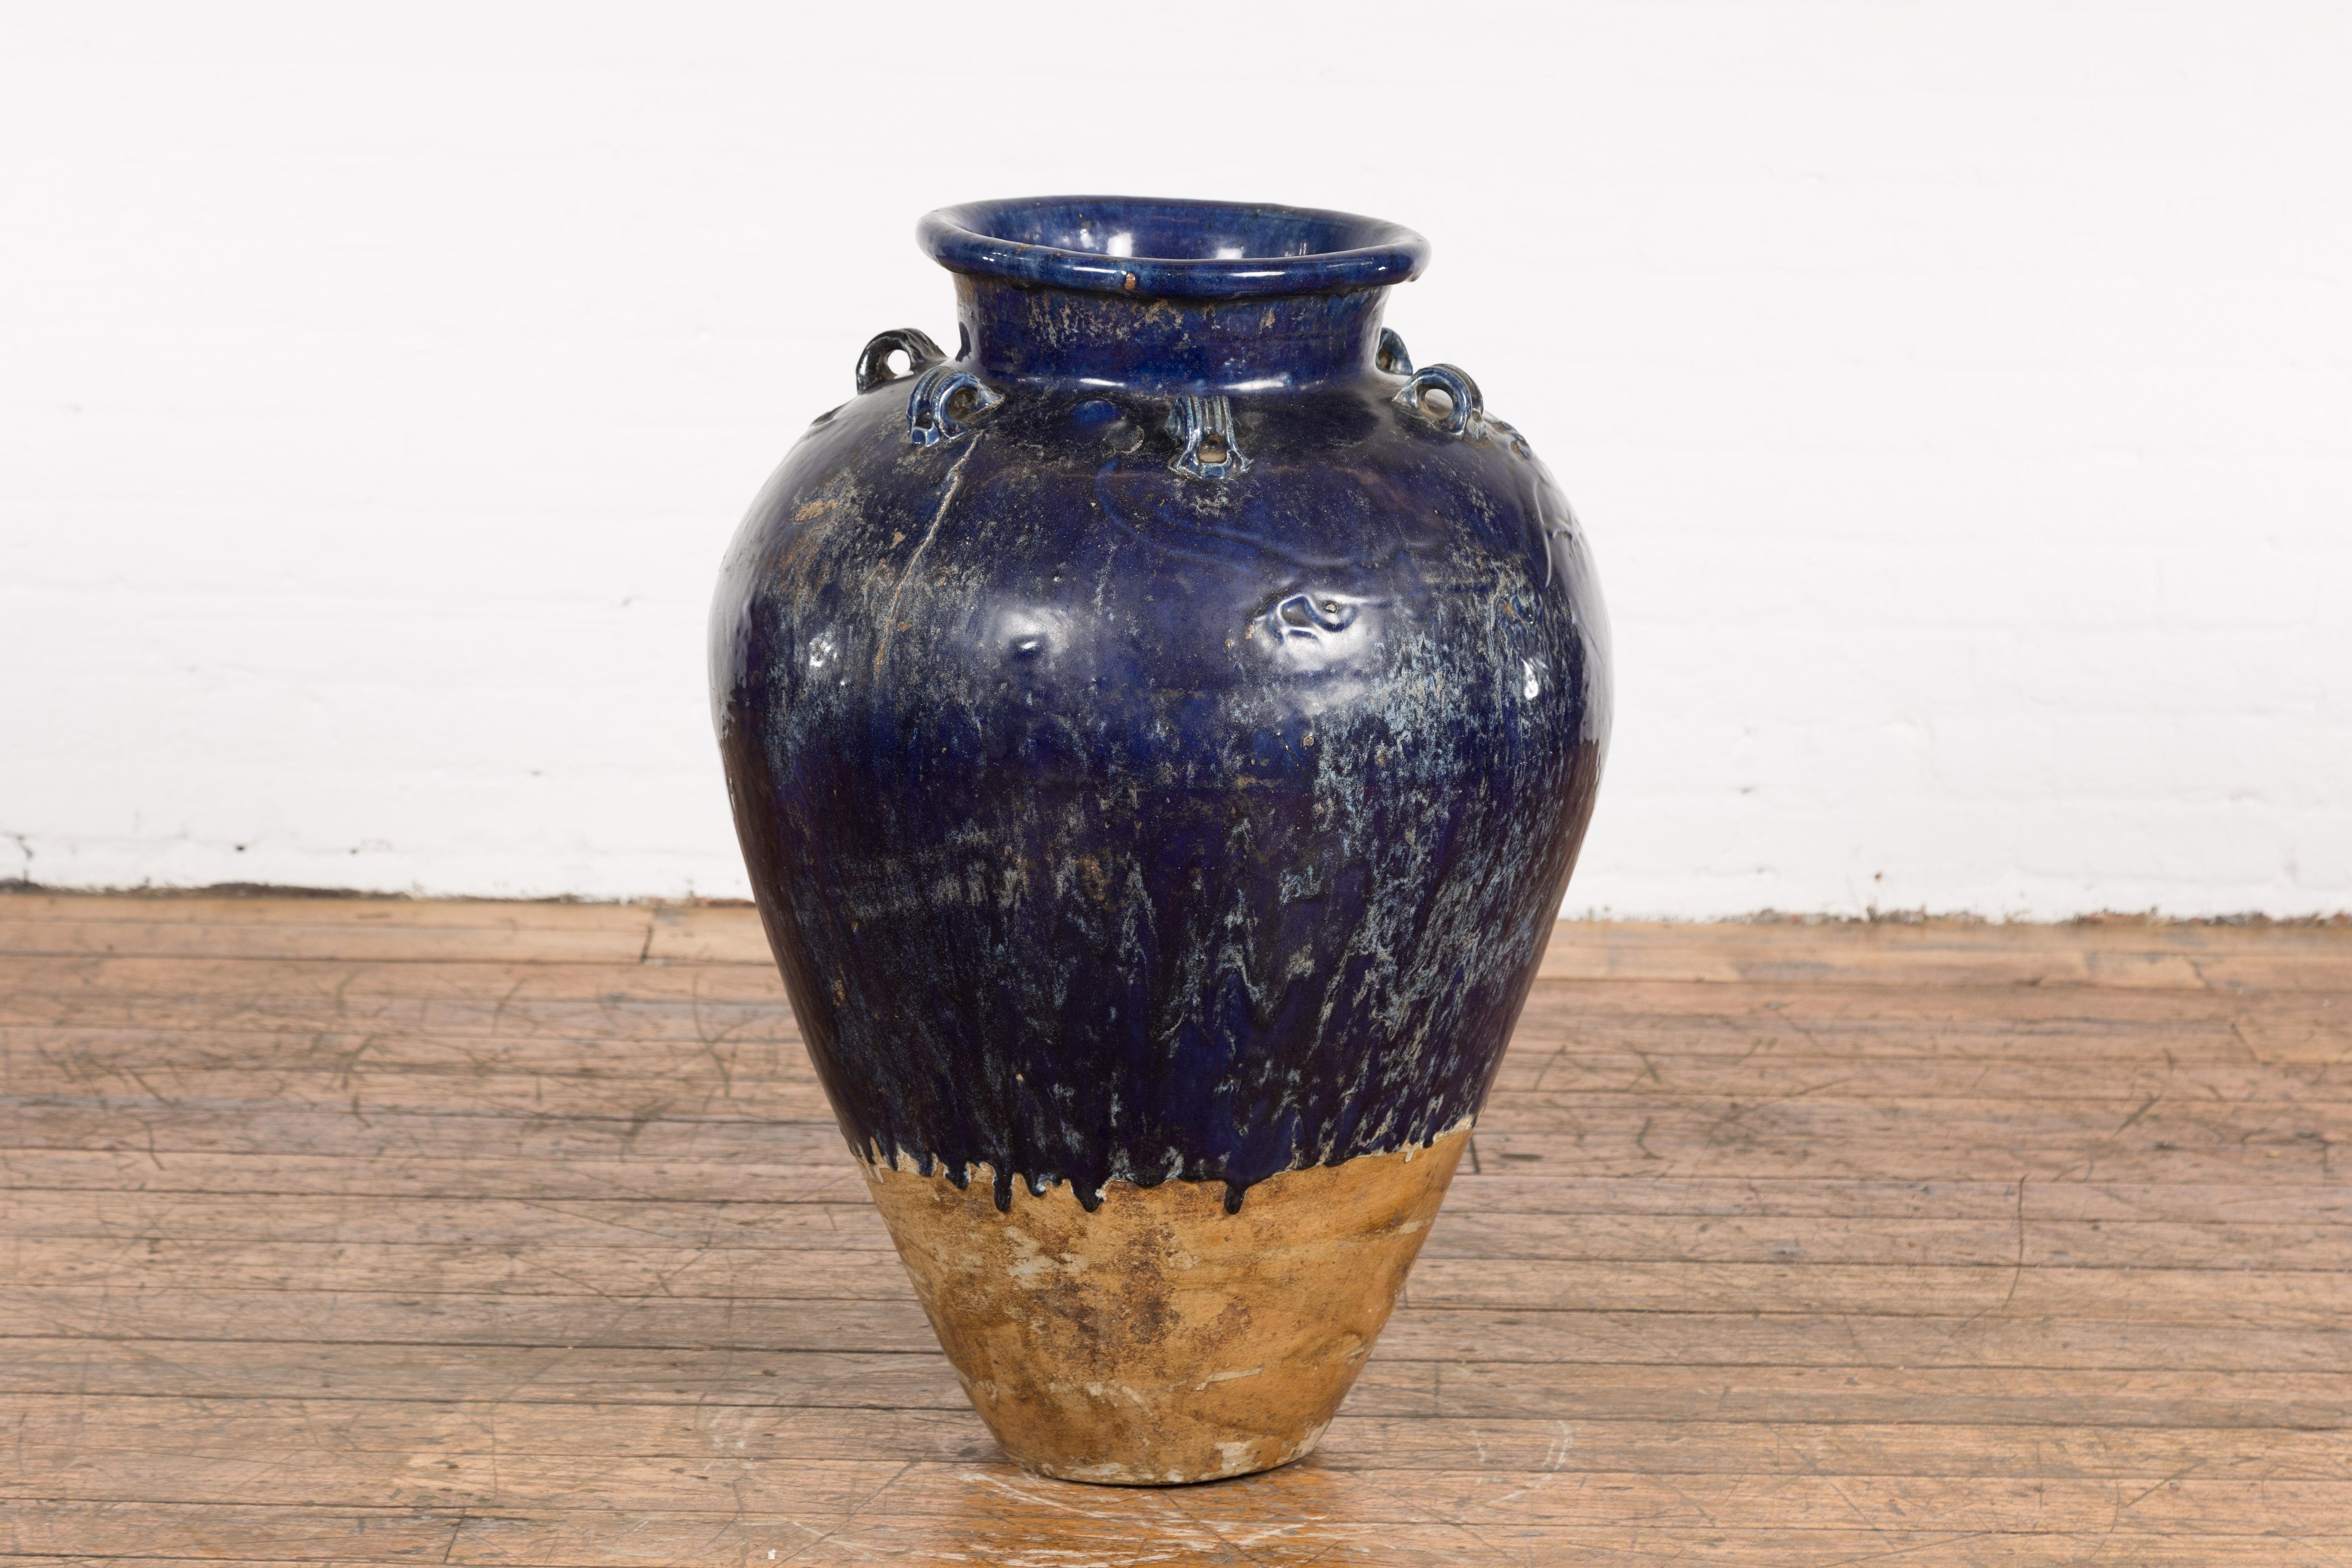 A large antique Thai cobalt blue glazed Martaban jar from the 19th century, with petite swan neck loops, raised dragon motifs and tapering lines. This large antique Thai cobalt blue glazed Martaban jar from the 19th century is an exceptional blend